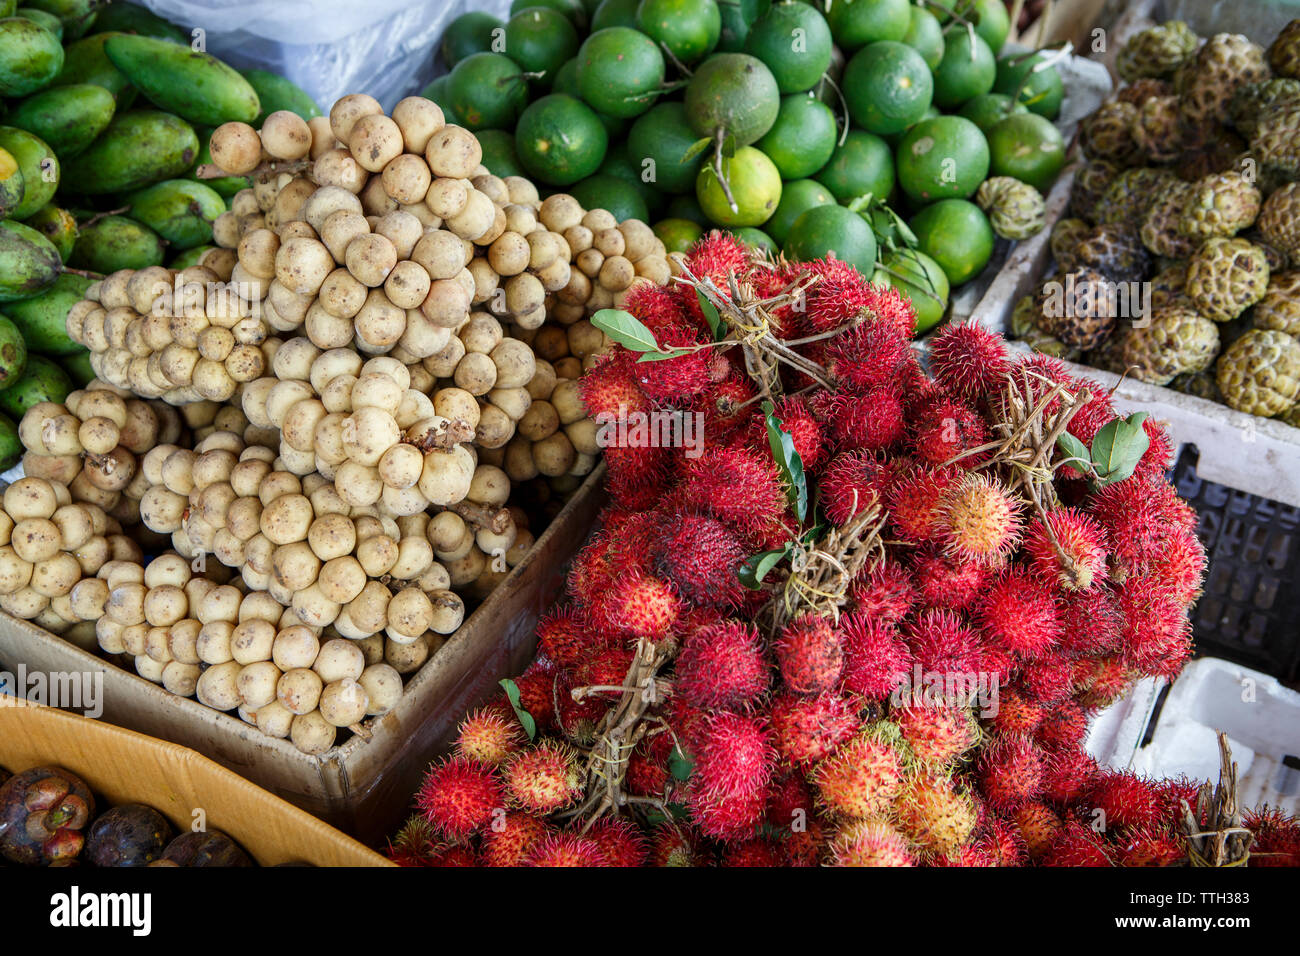 Rambutan and other fruits for sale at a market in Siem Reap, Cambodia. Stock Photo